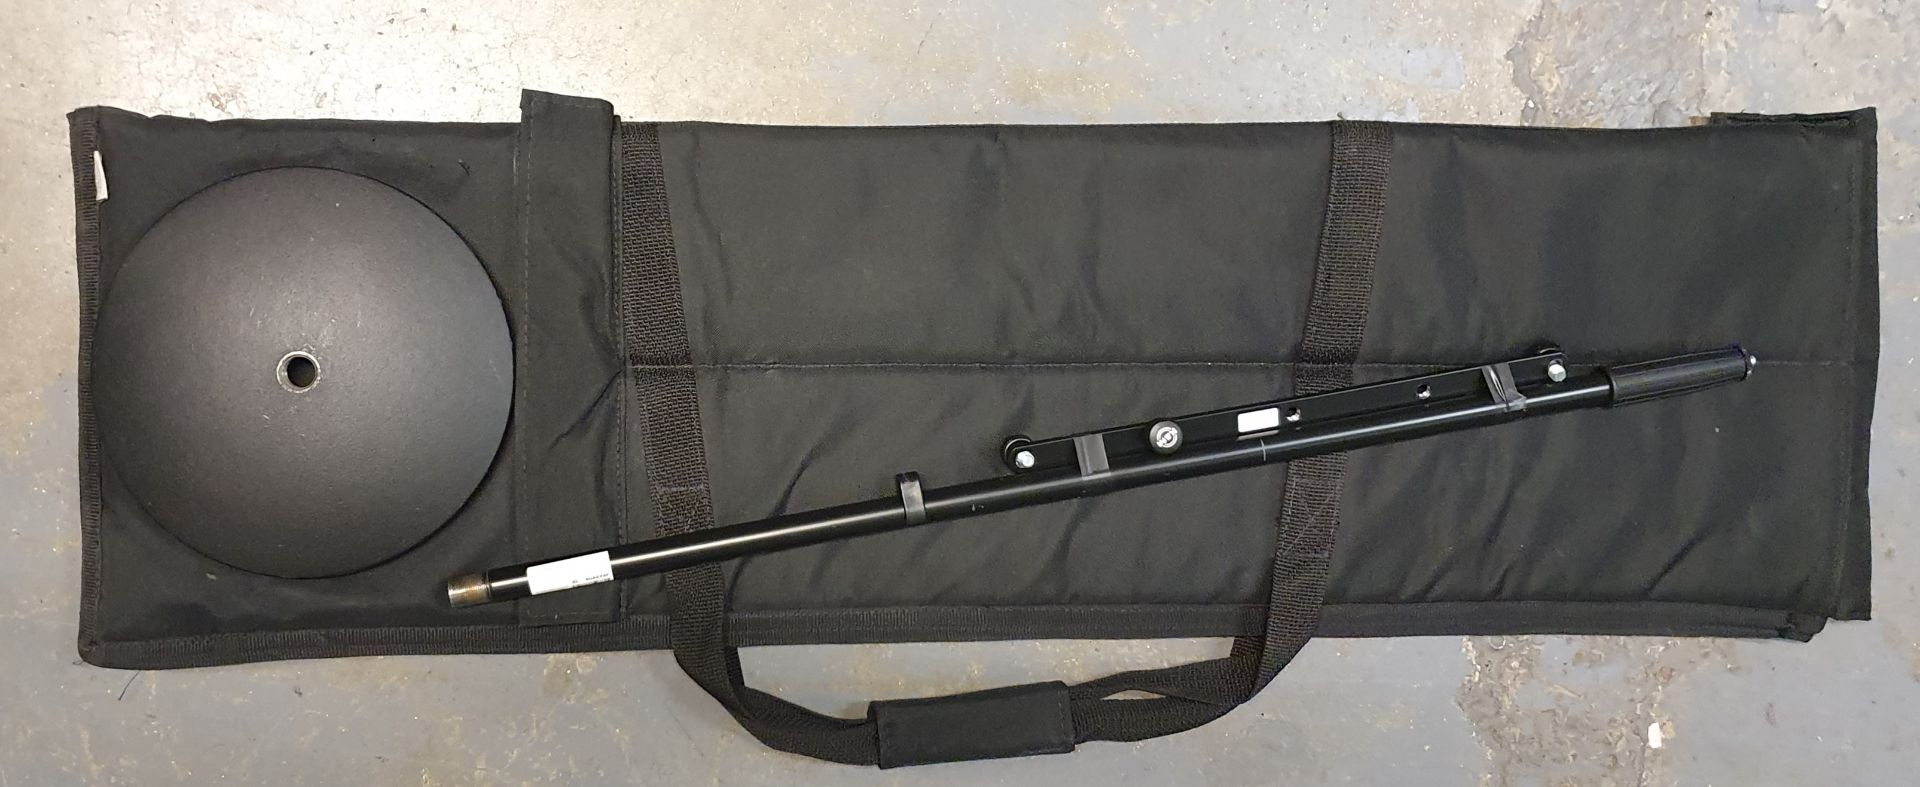 A Black T-Bar Stand with carry bag. - Image 2 of 2